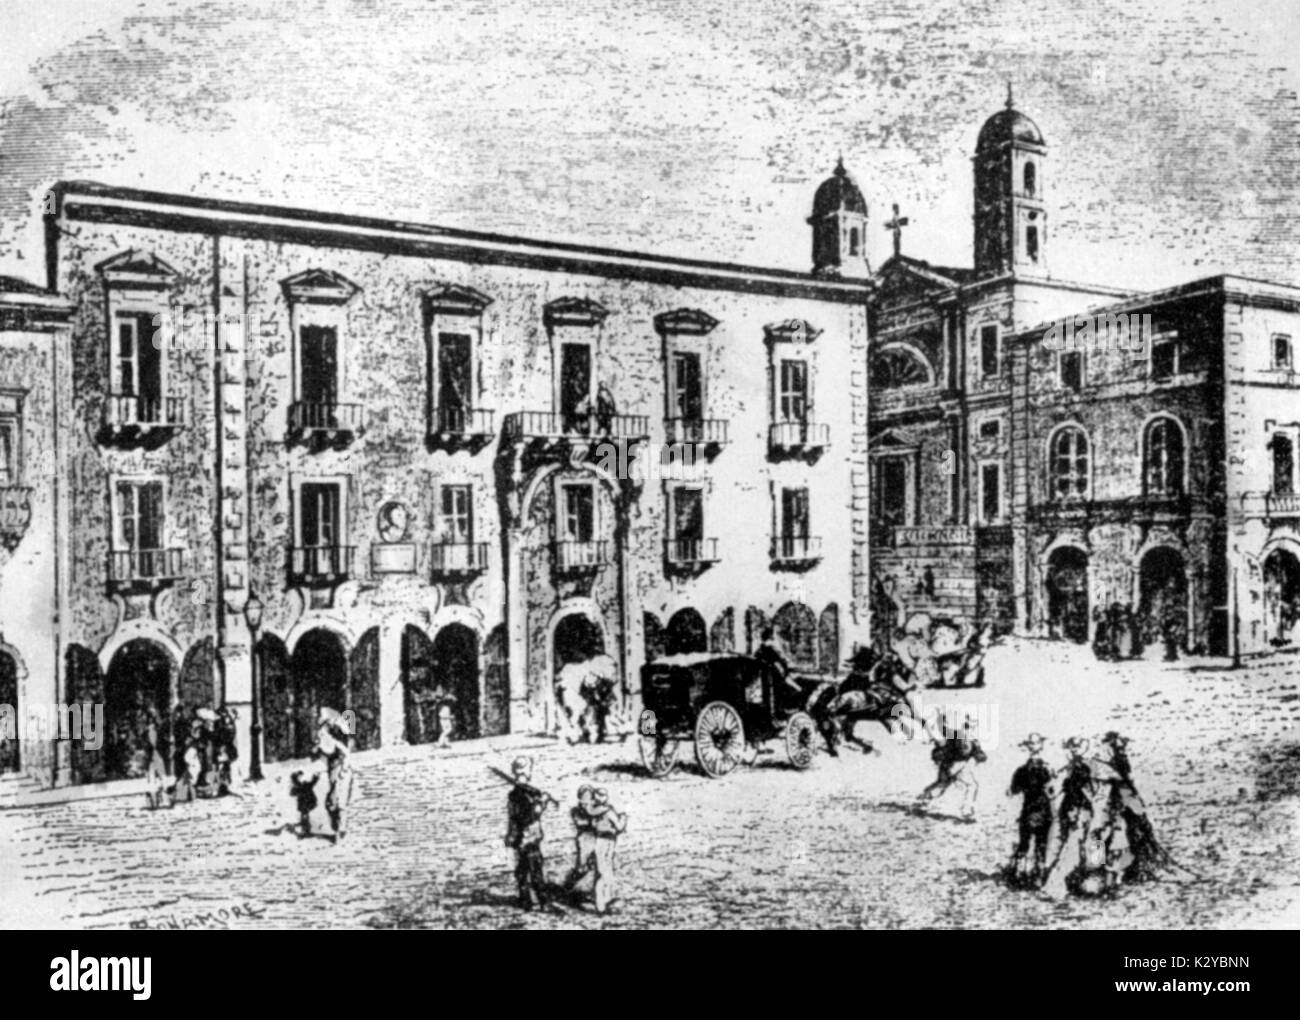 Vincenzo BELLINI 's house at Catania where he was born.  Italian composer, 3 November 1801 - 23 September 1835.  Drawing by Buonamore. Stock Photo